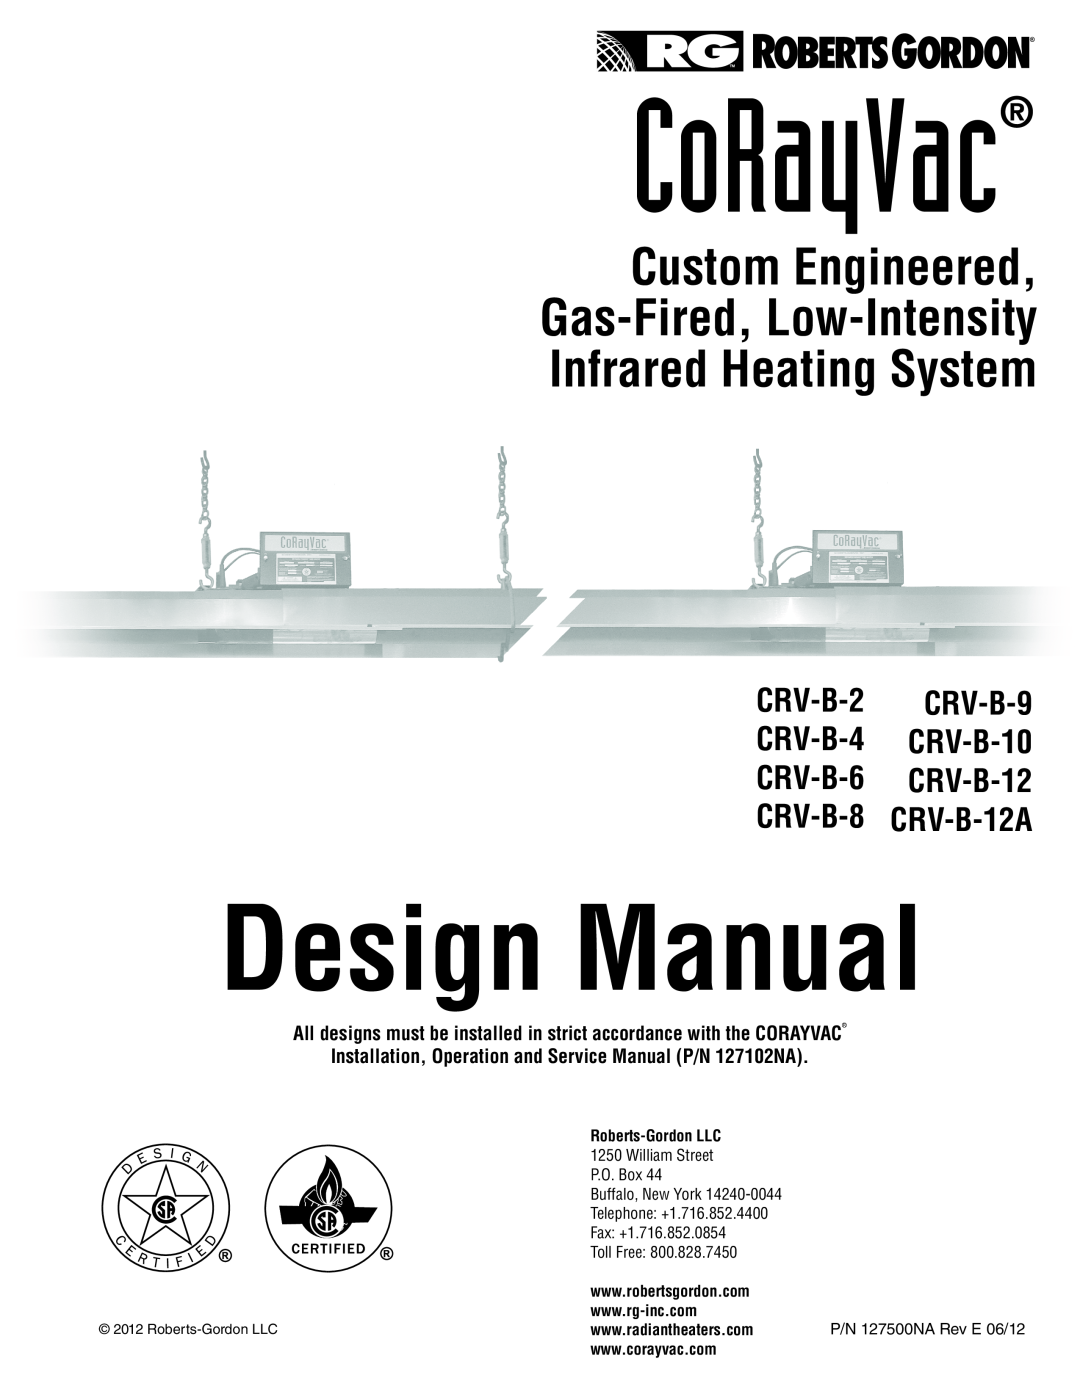 Roberts Gorden CRV-B-9 service manual CoRayVac, Heating Systems, Custom-Engineered Low-IntensityInfrared, If you smell gas 